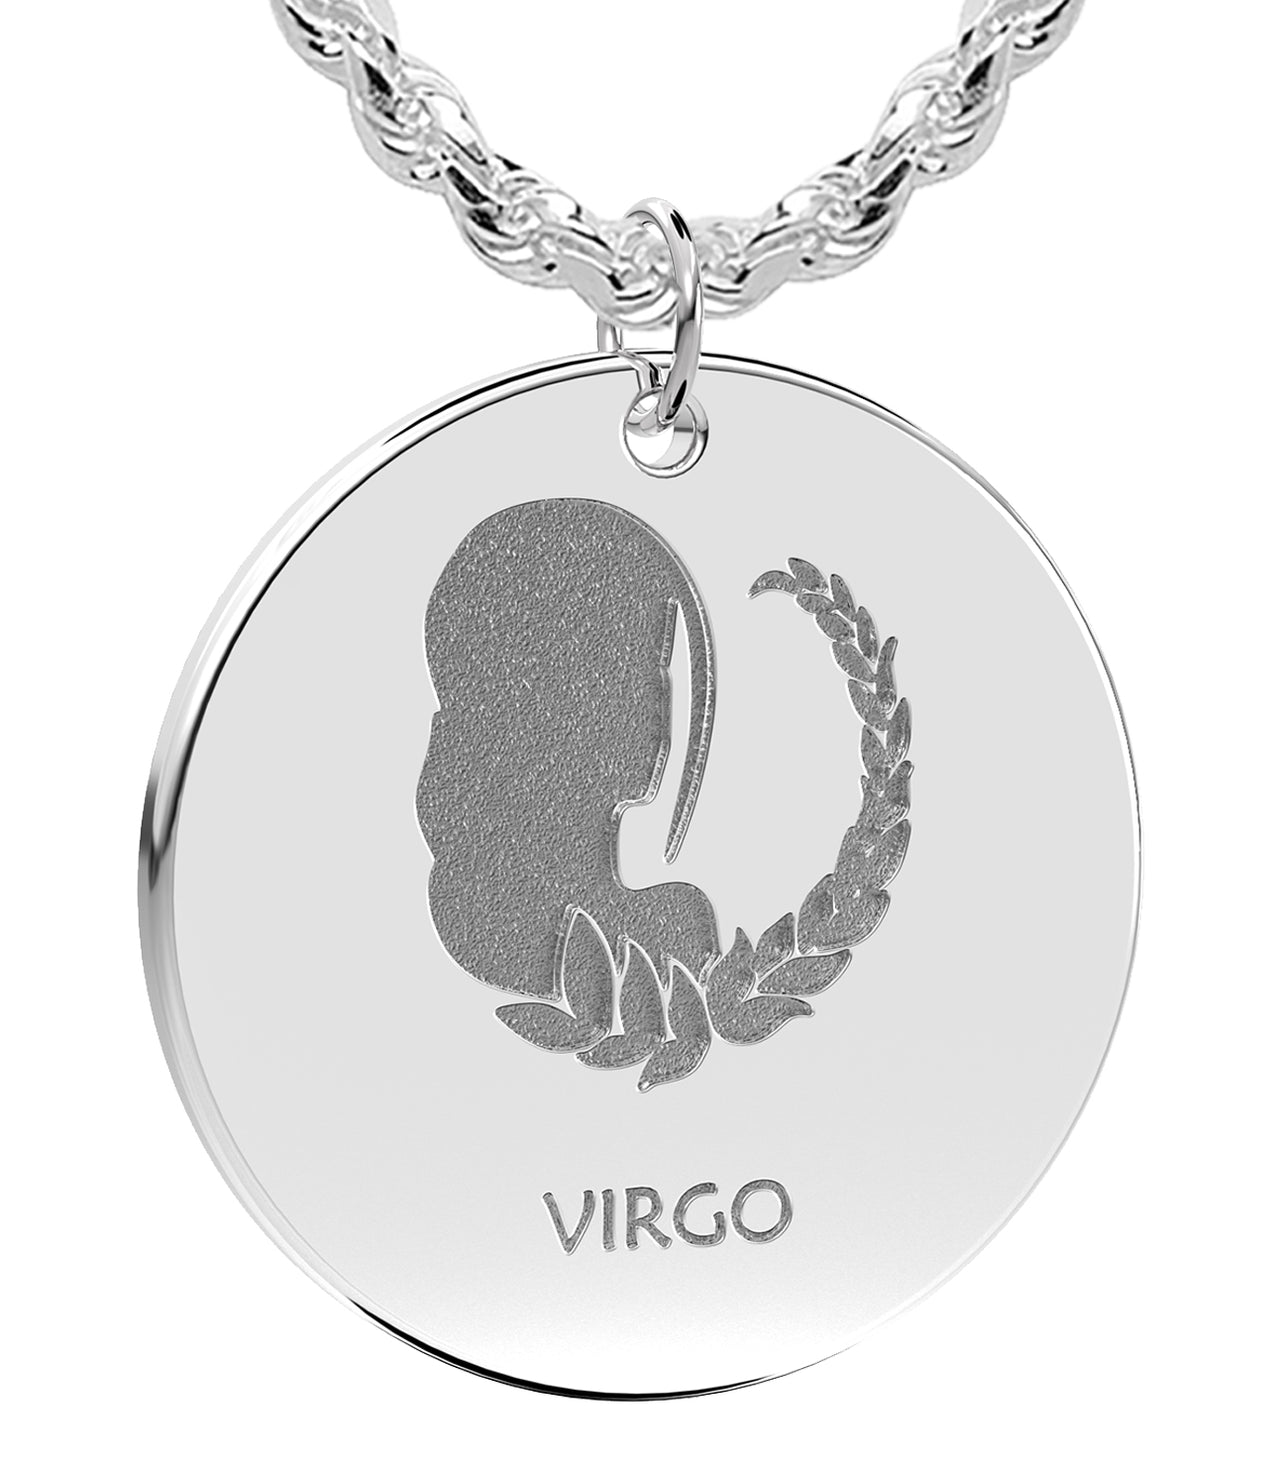 Men's 925 Sterling Silver 1in Round Virgo Zodiac Polished Pendant Necklace